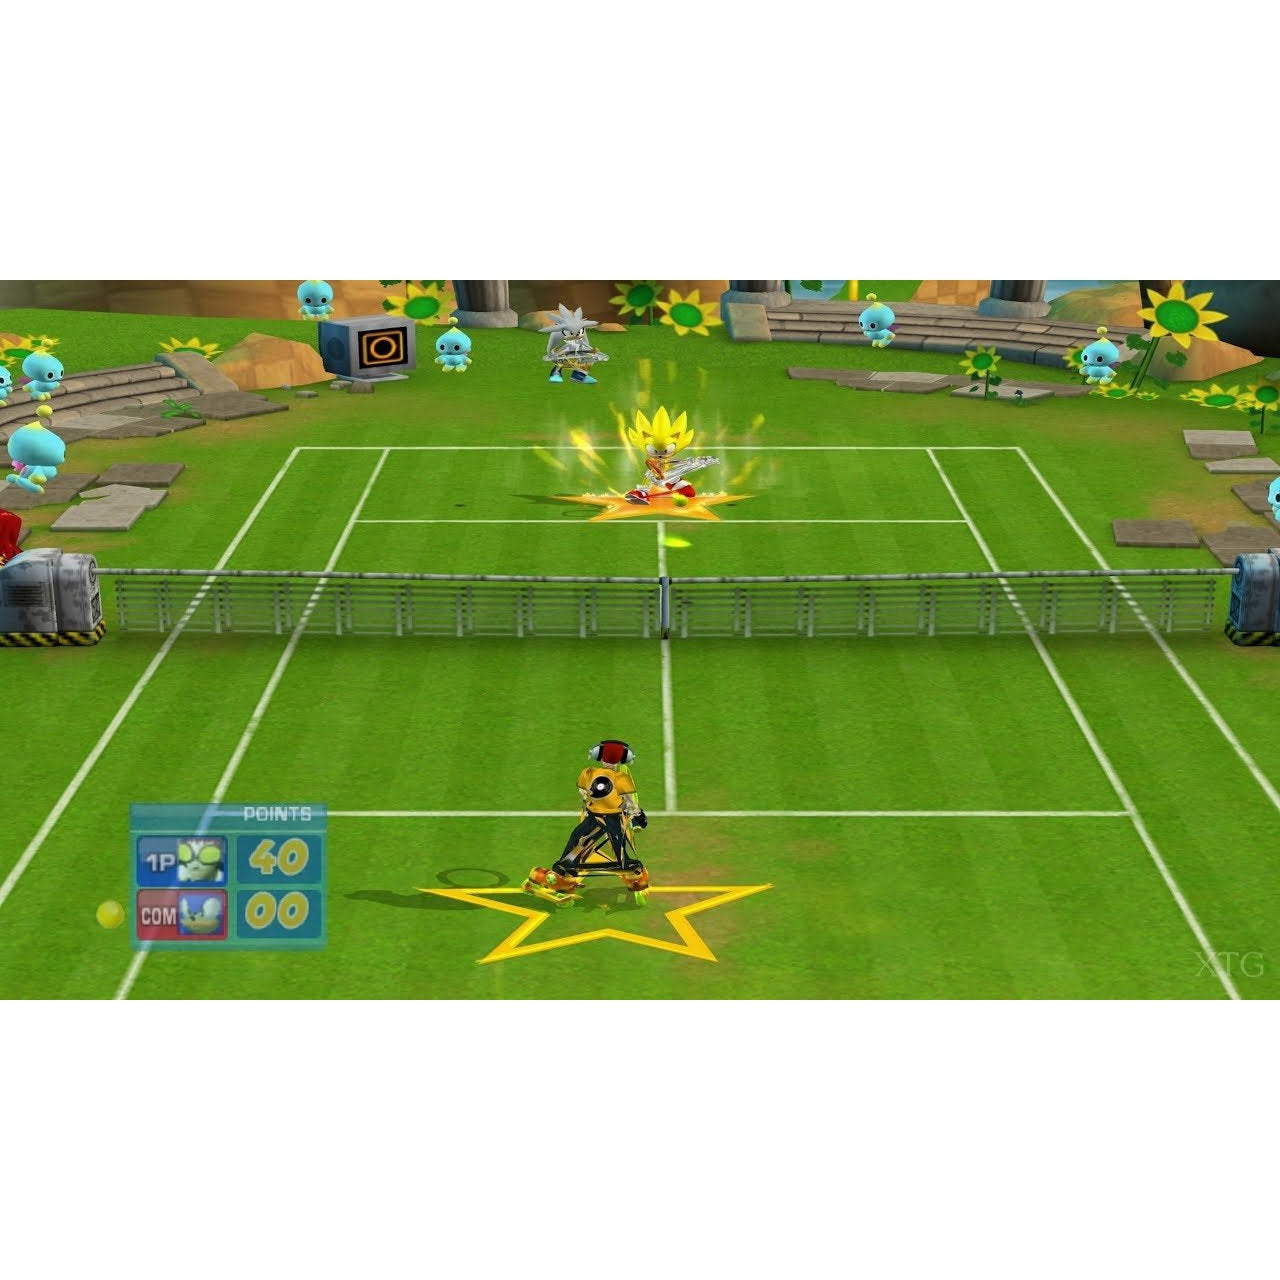 SEGA Superstars Tennis - PlayStation 2 (PS2) Game Complete - YourGamingShop.com - Buy, Sell, Trade Video Games Online. 120 Day Warranty. Satisfaction Guaranteed.